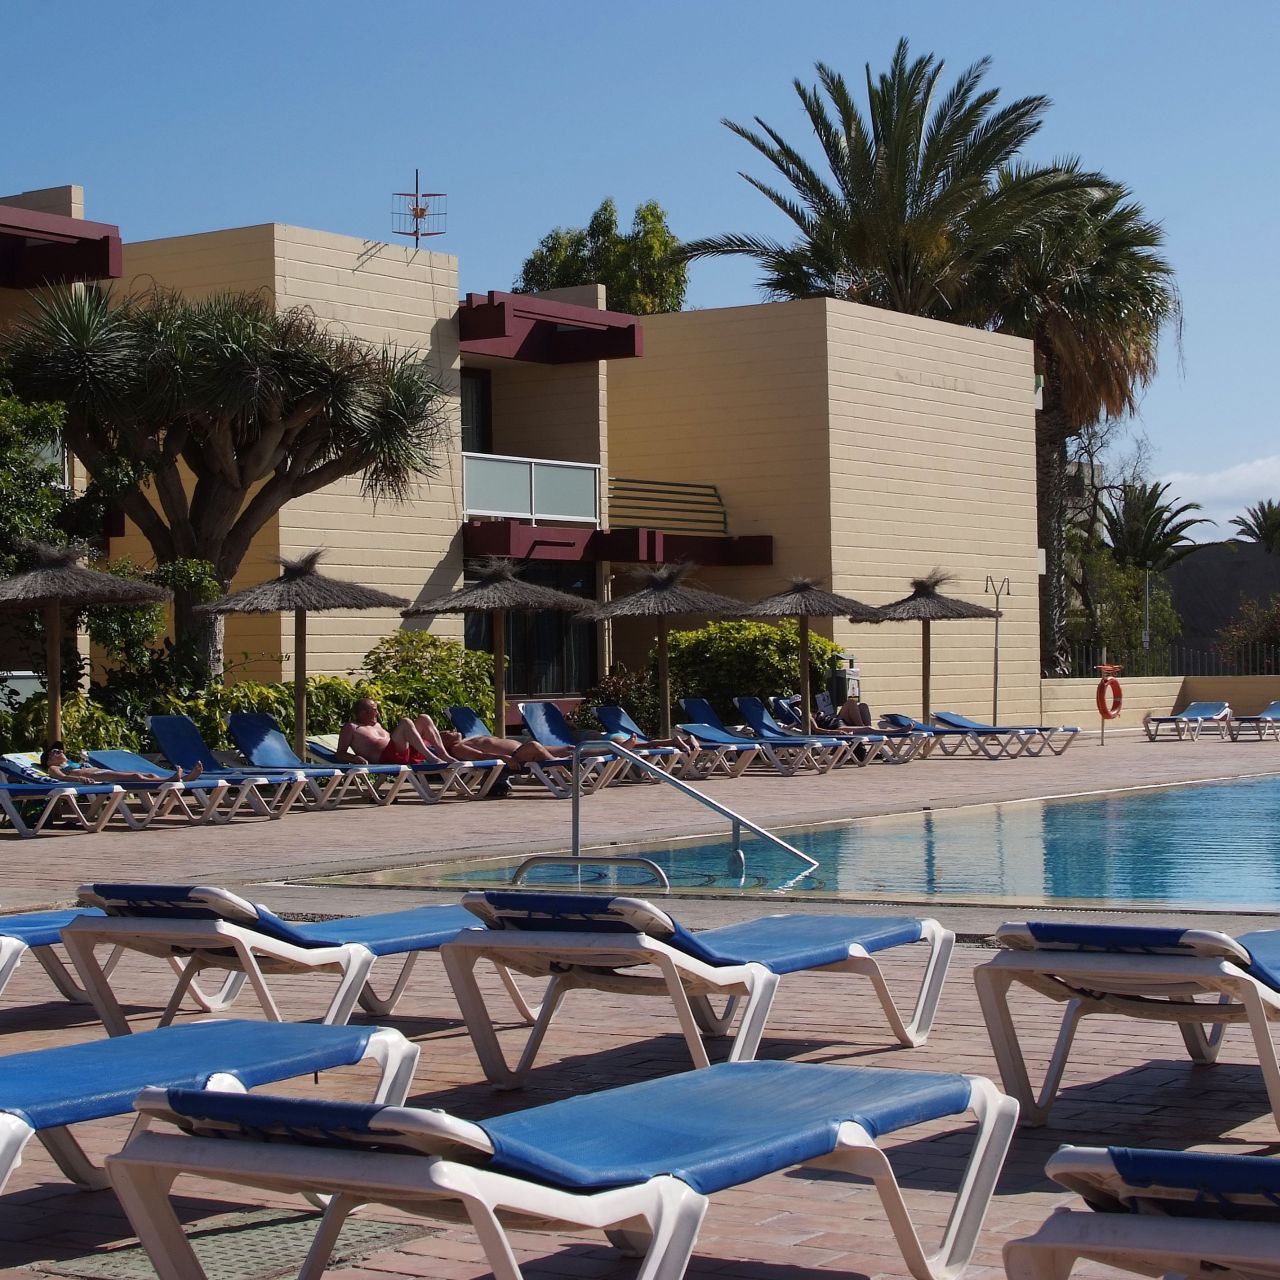 Hotel Palia Don Pedro - Canary Islands - Great prices at HOTEL INFO